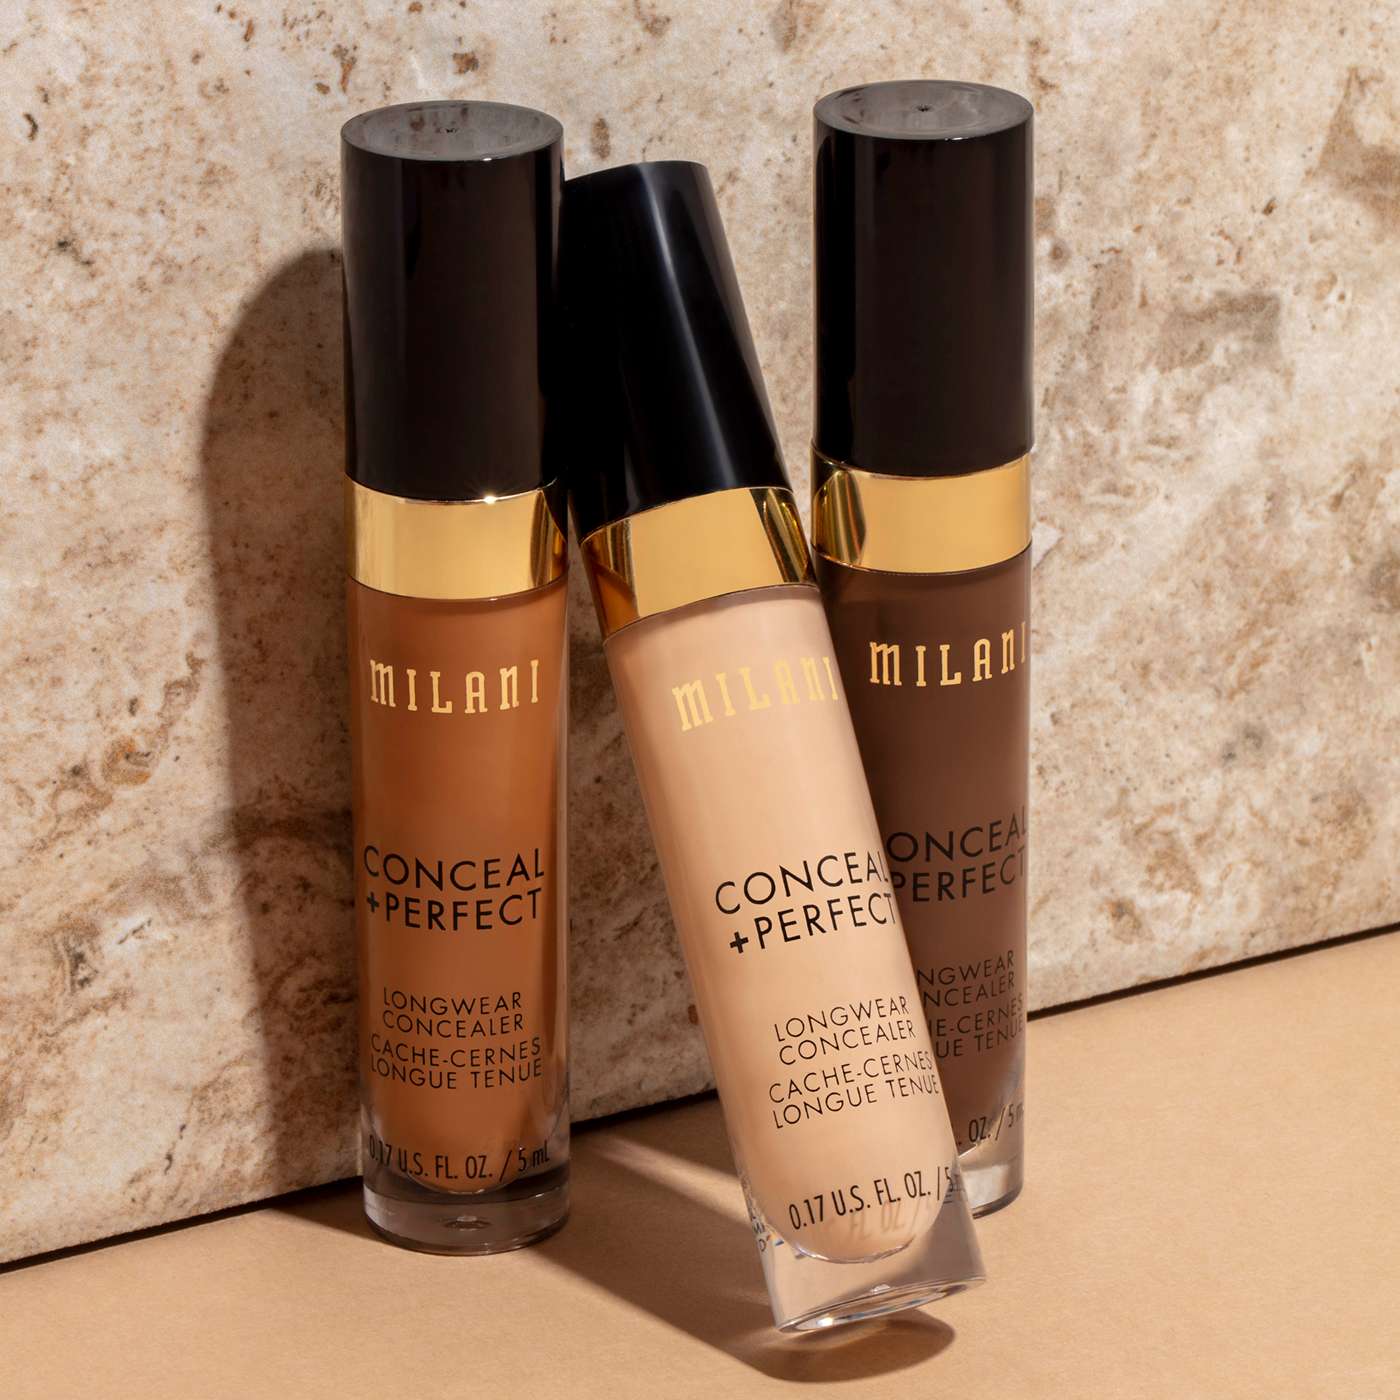 Milani Conceal +Perfect Longwear Concealer - Warm Almond; image 2 of 7